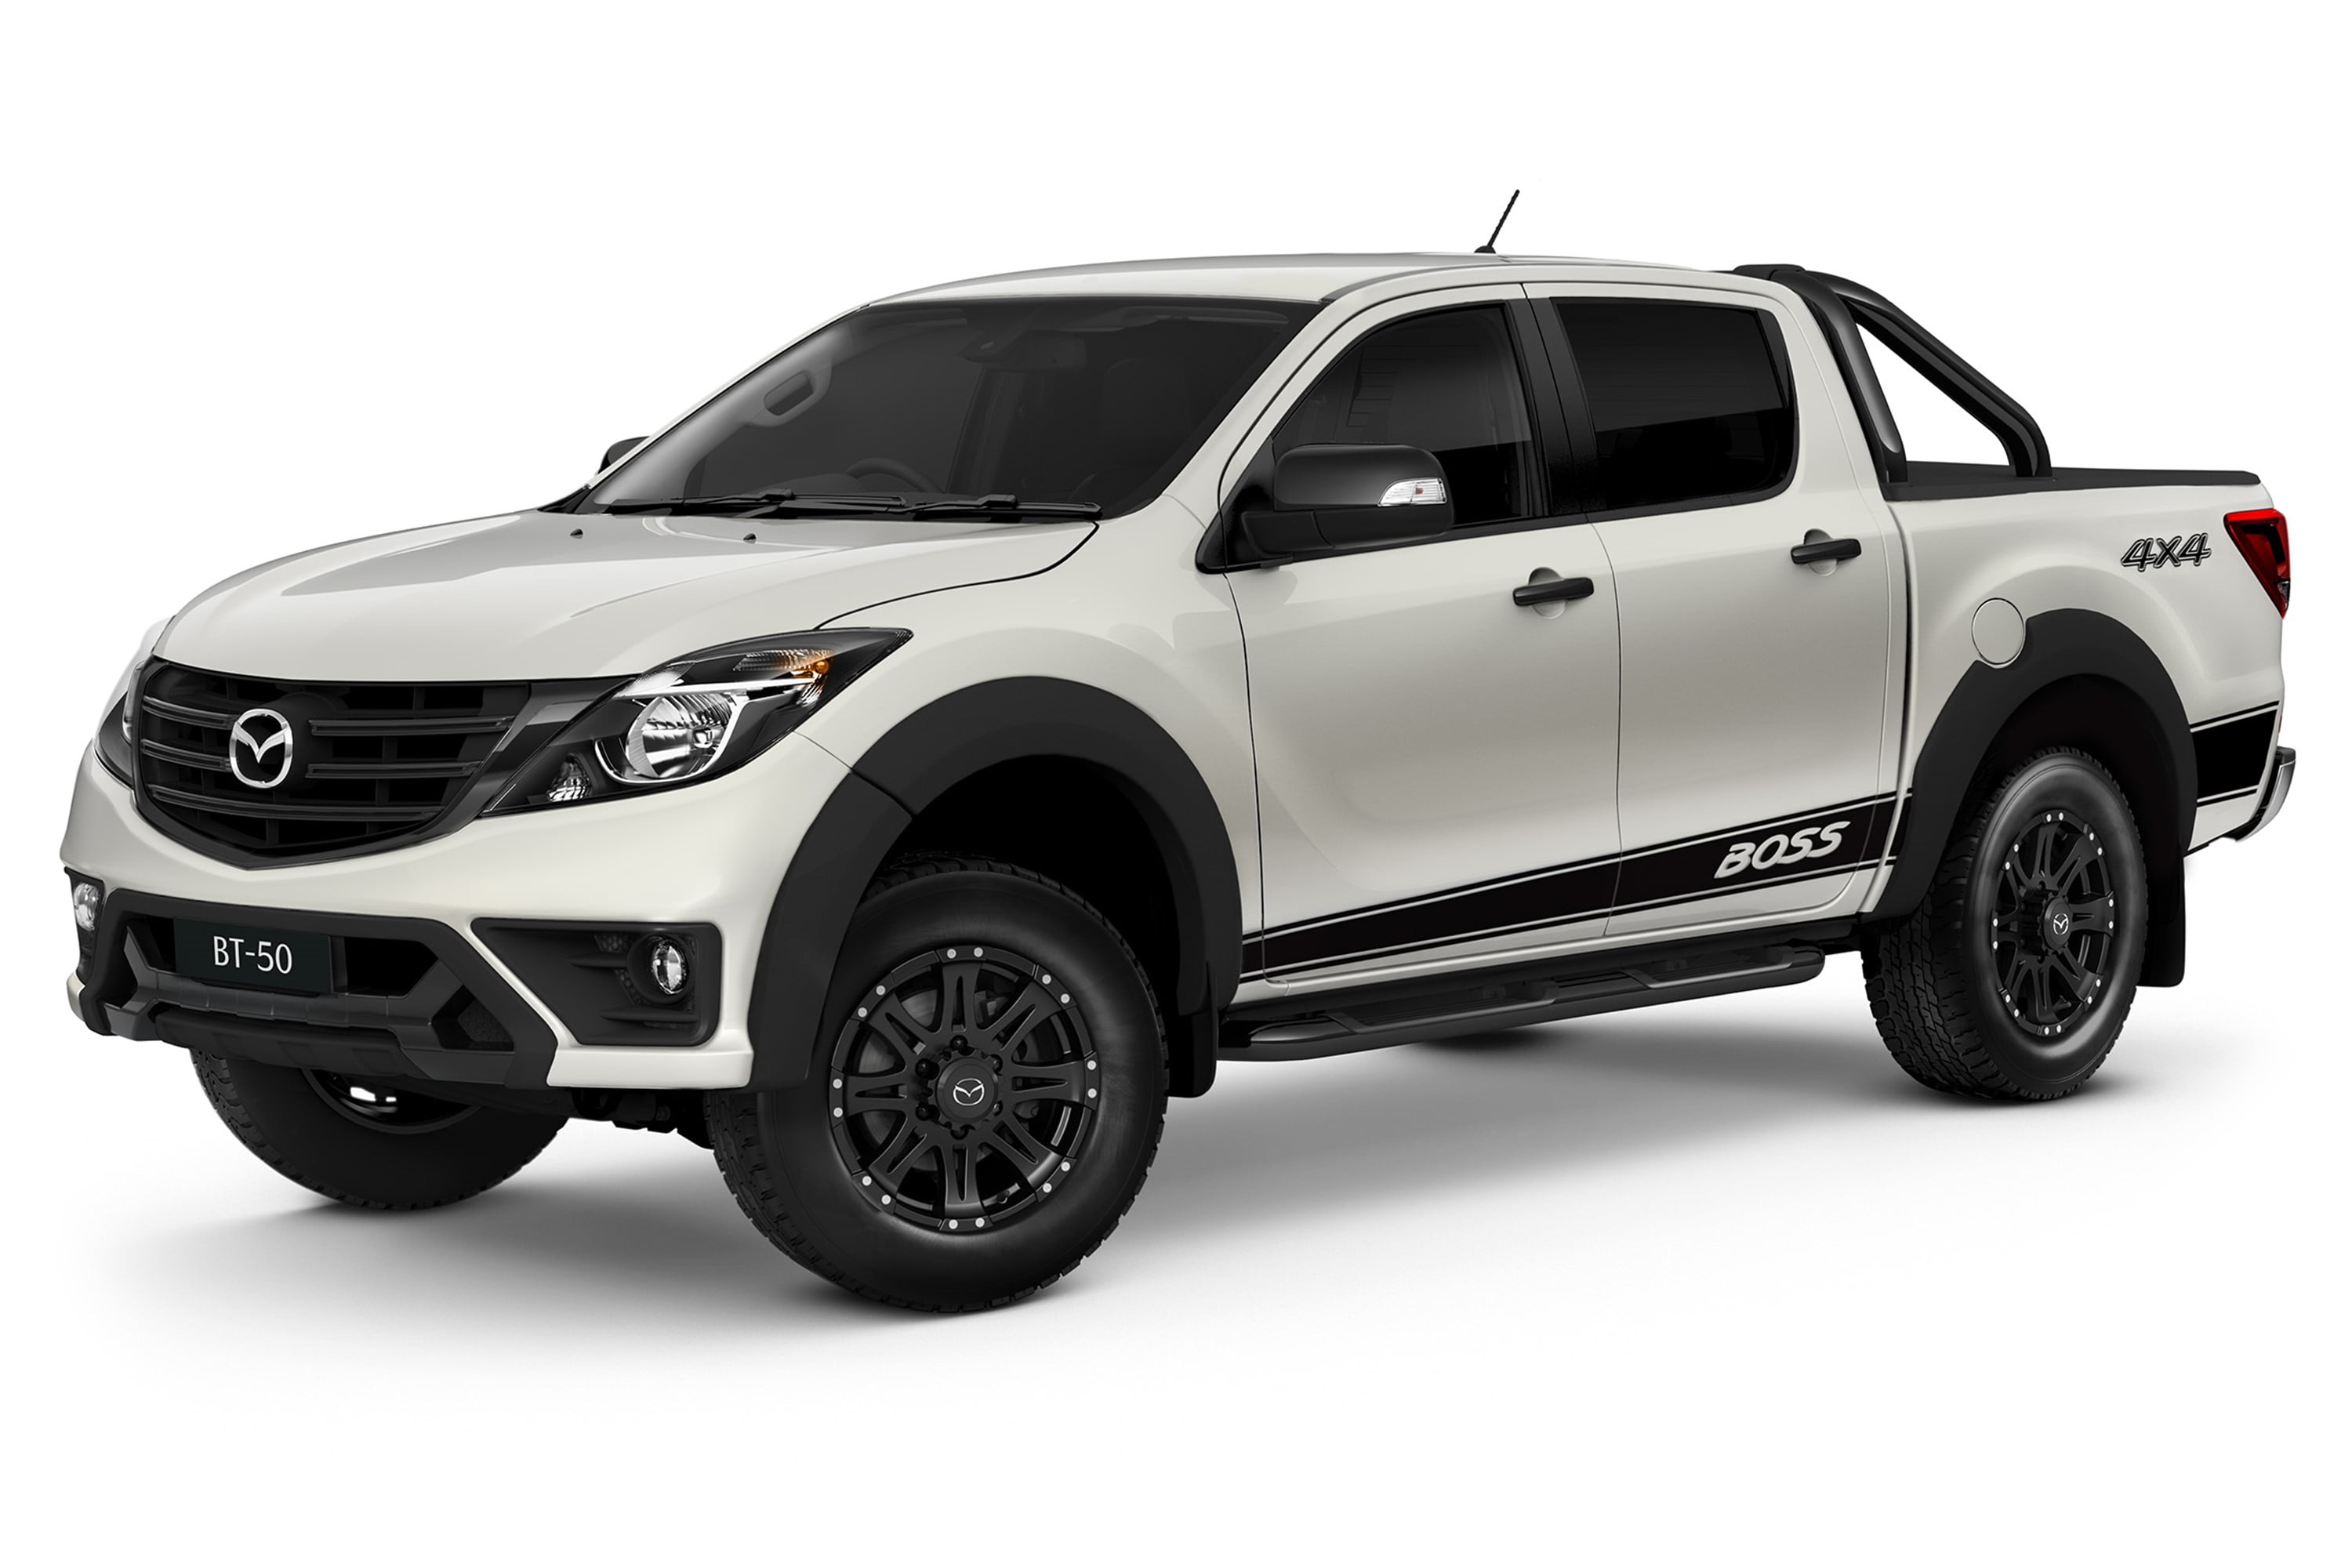 Mazda BT-50 Boss on Sale Now - Ute Guide